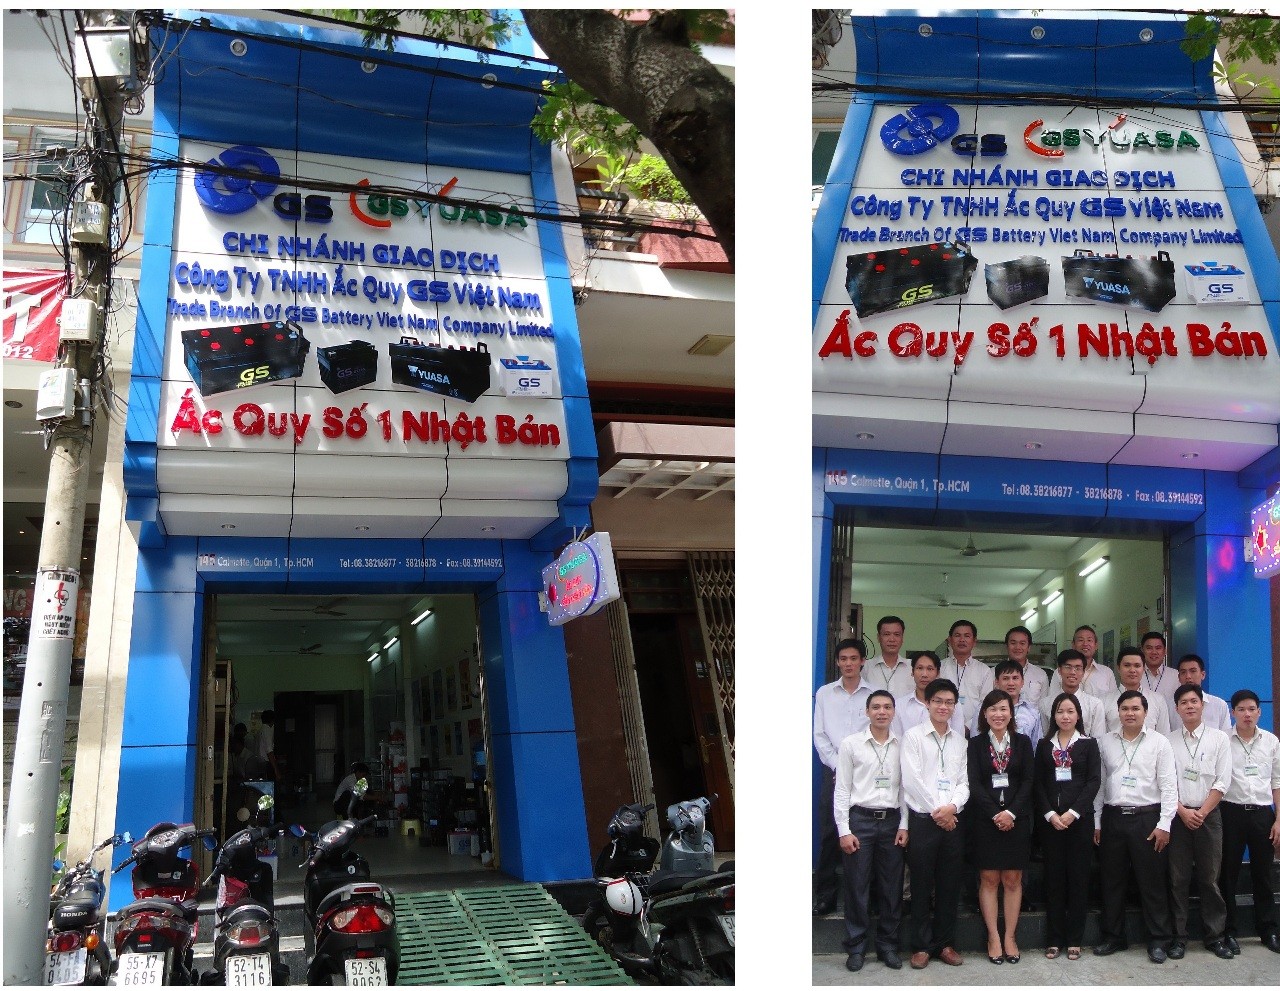 GRAND OPENING CEREMONY NEW OFFICE HCM BRANCH & SHOWROOM GS BATTERY VIET NAM CO.LTD